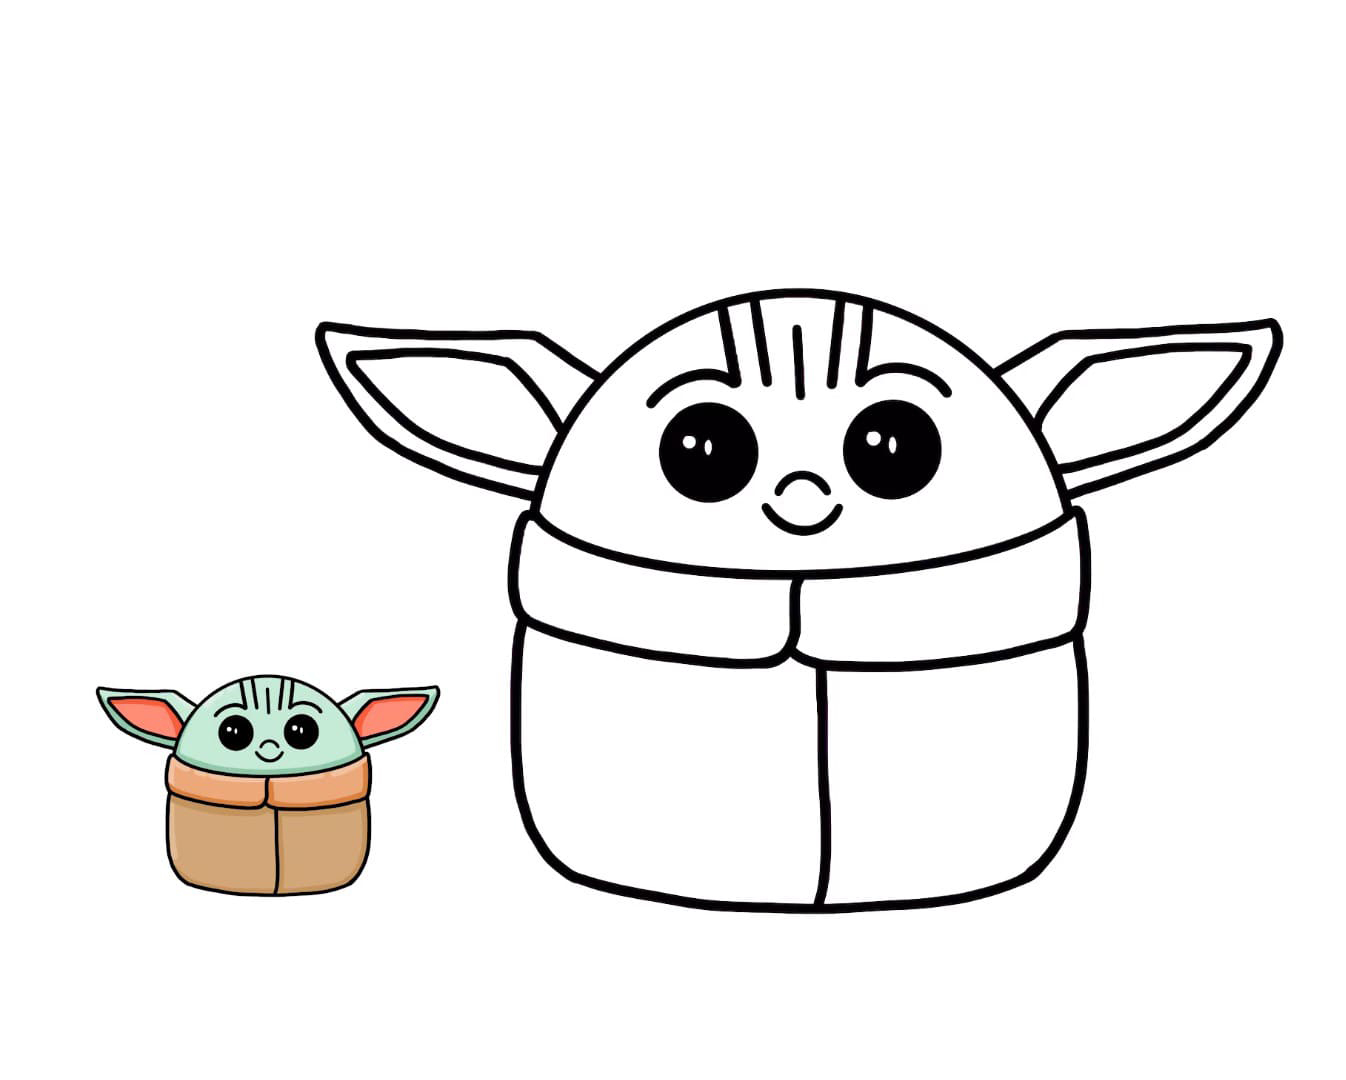 Coloring page Baby Yoda With a color coloring pattern For kids